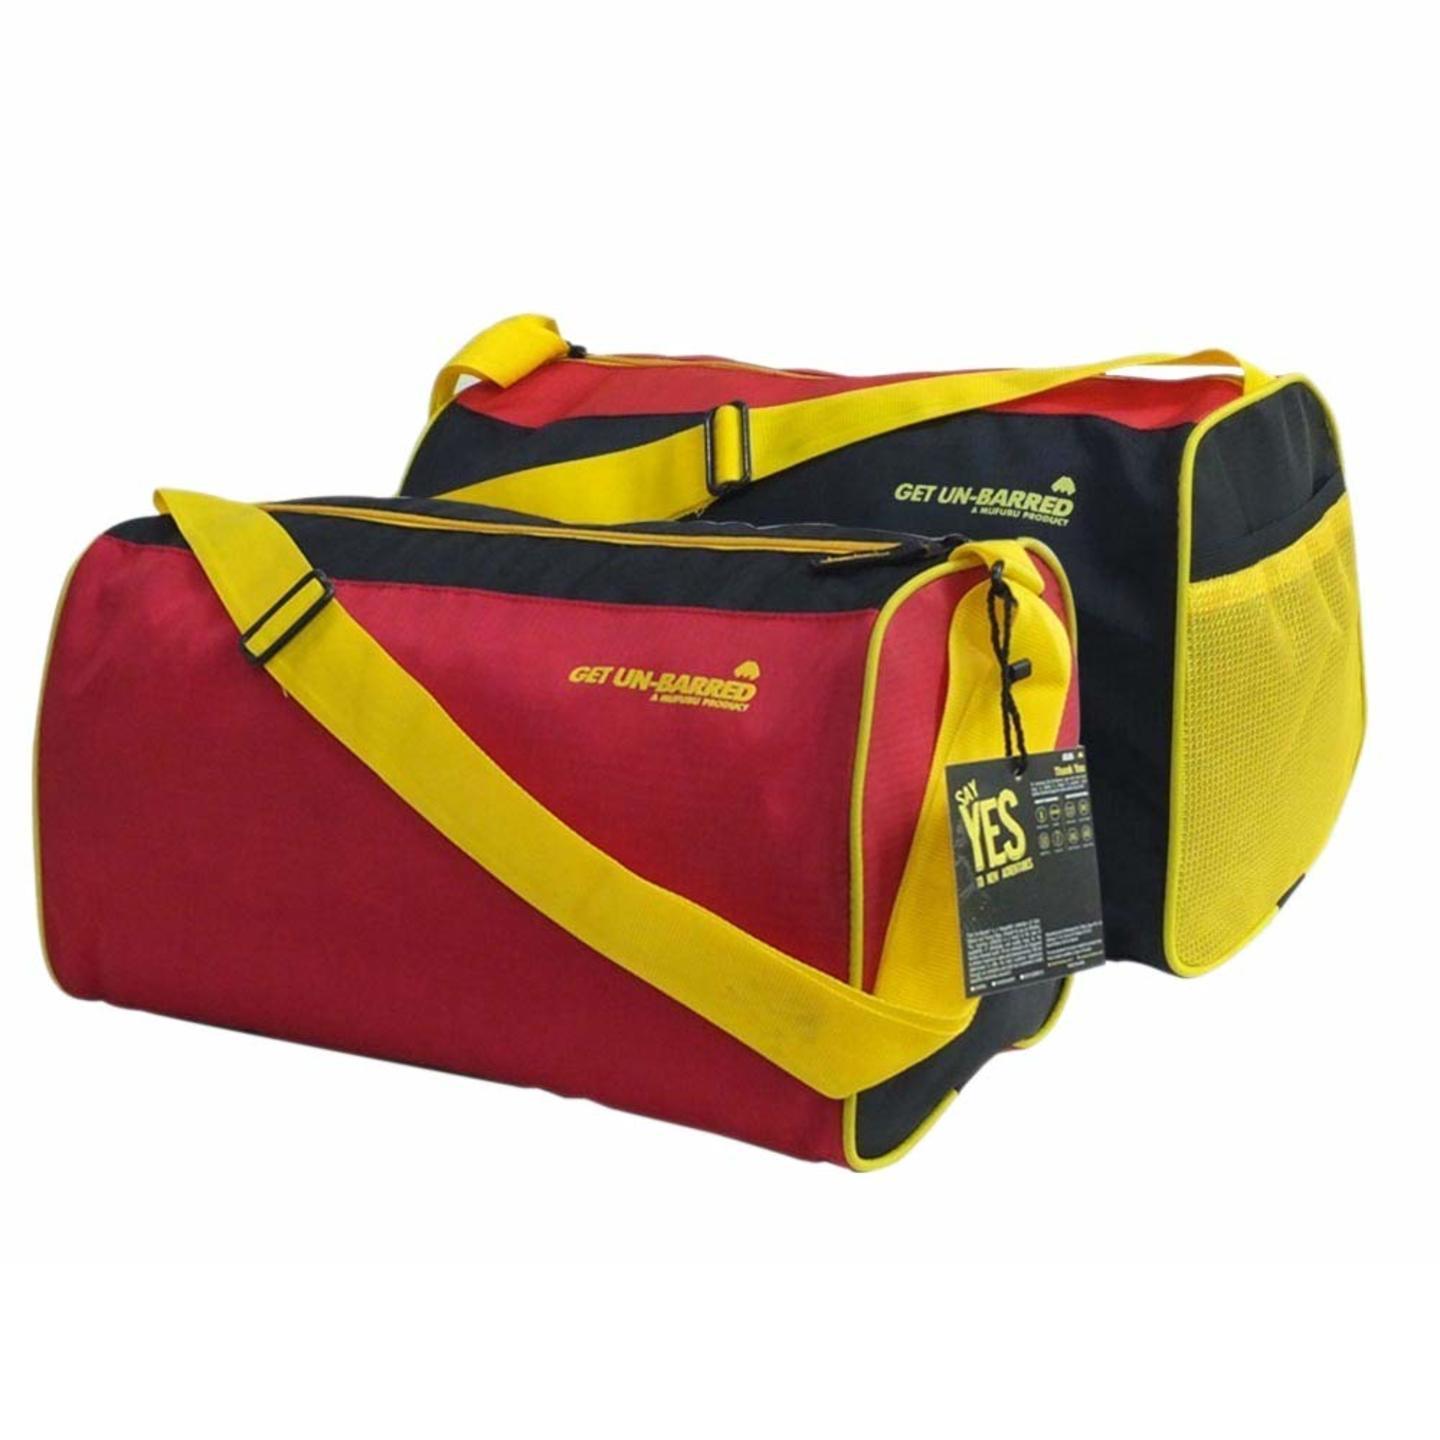 Say Yes to Adventure 20 litre Duffle Gym Bag